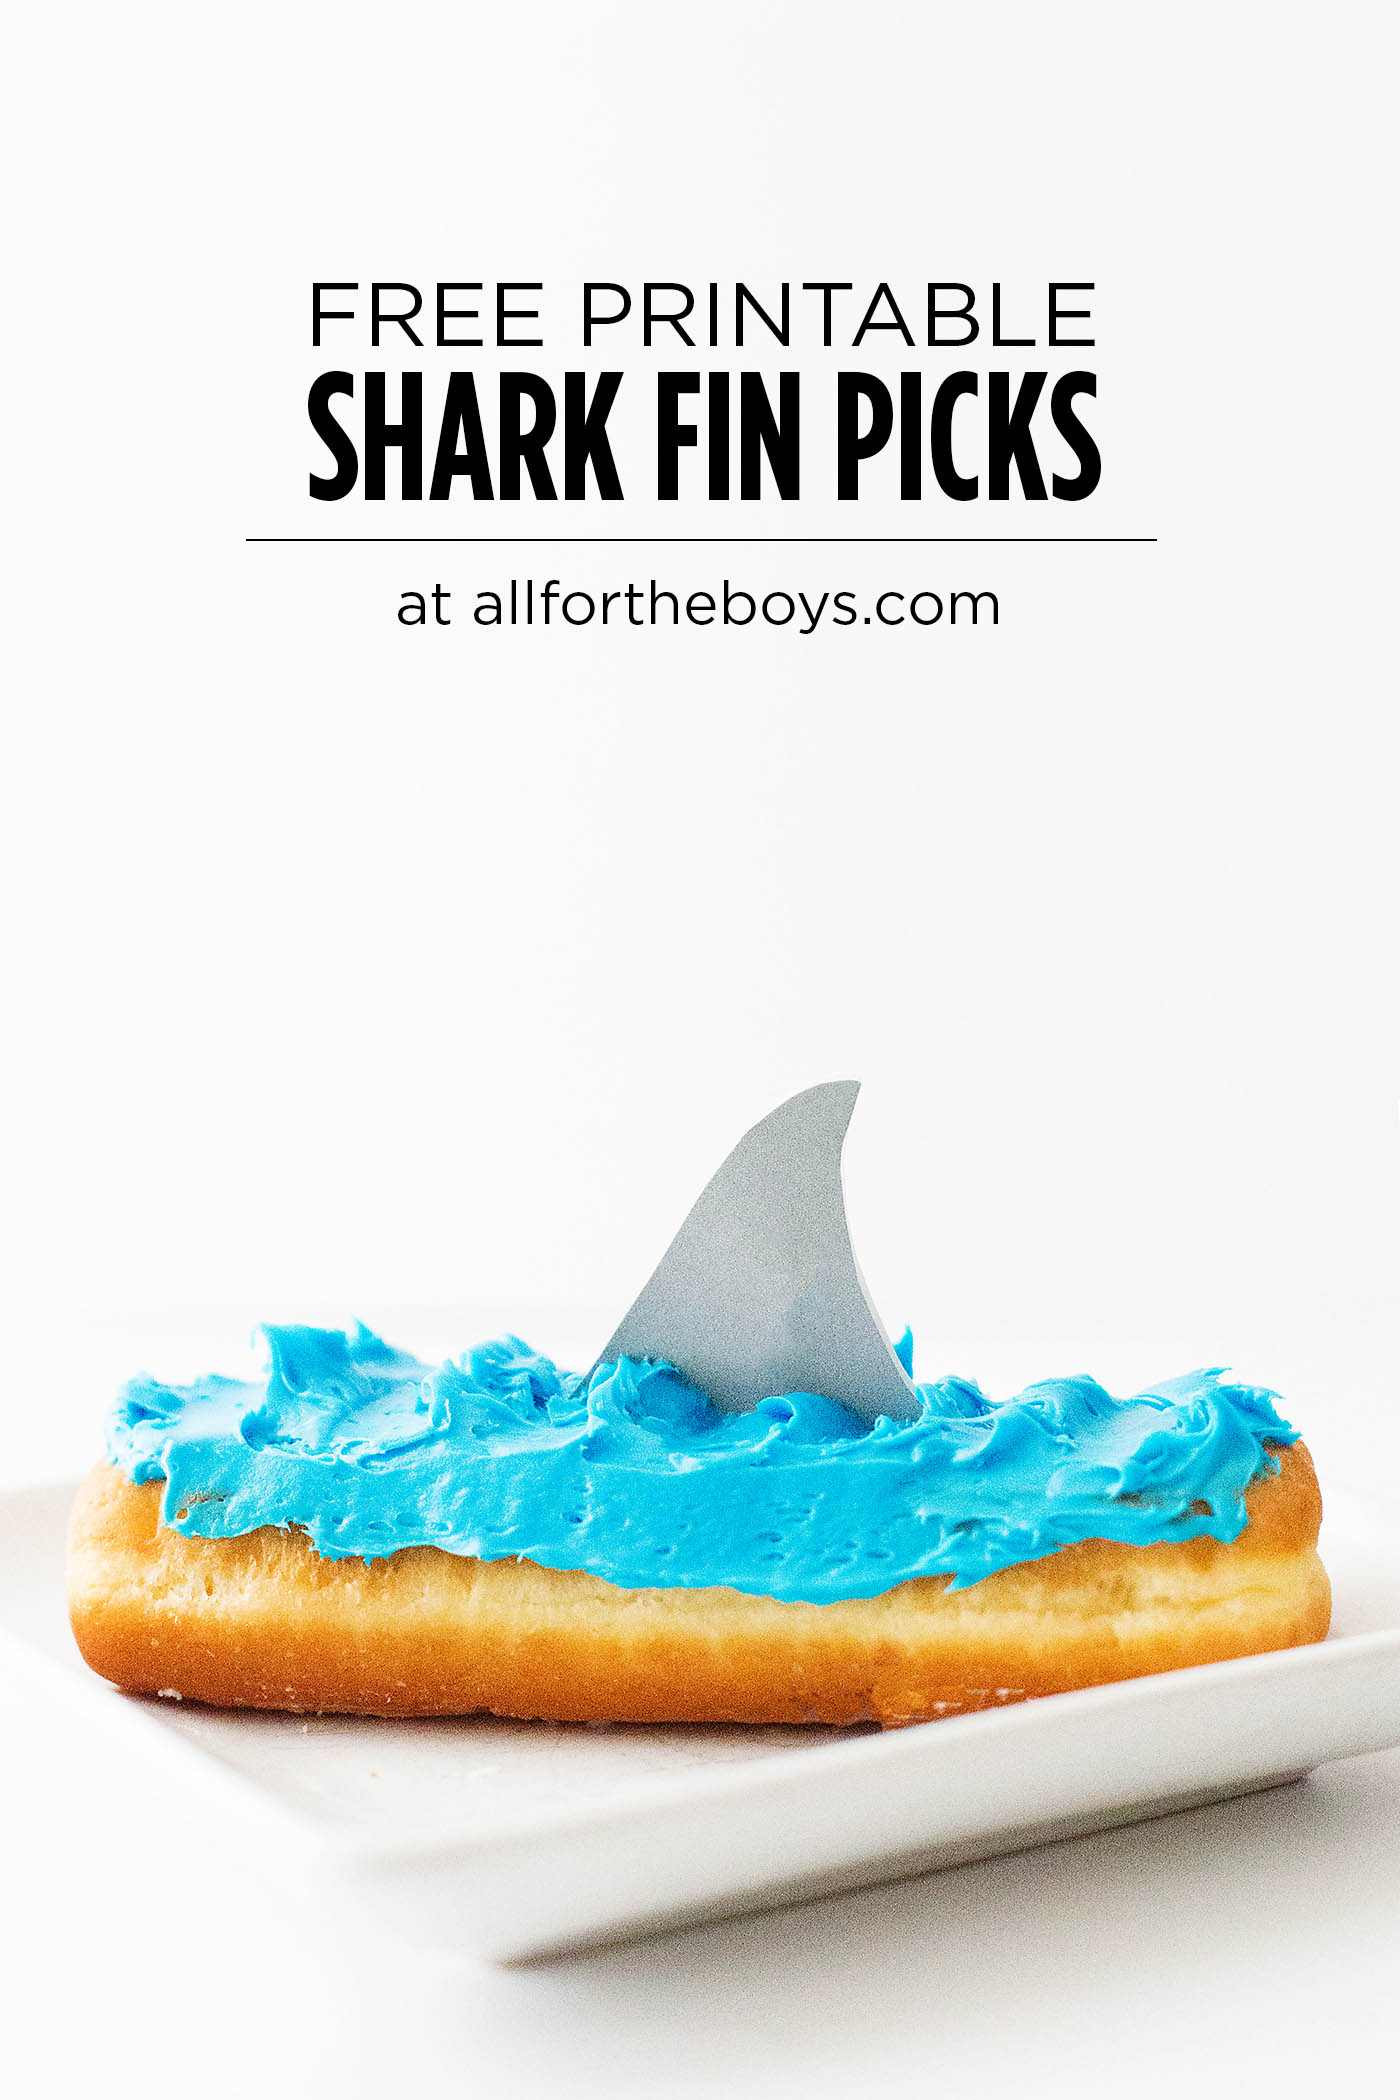 Free printable shark fin pick perfect for your shark lover and to celebrate Shark Week!